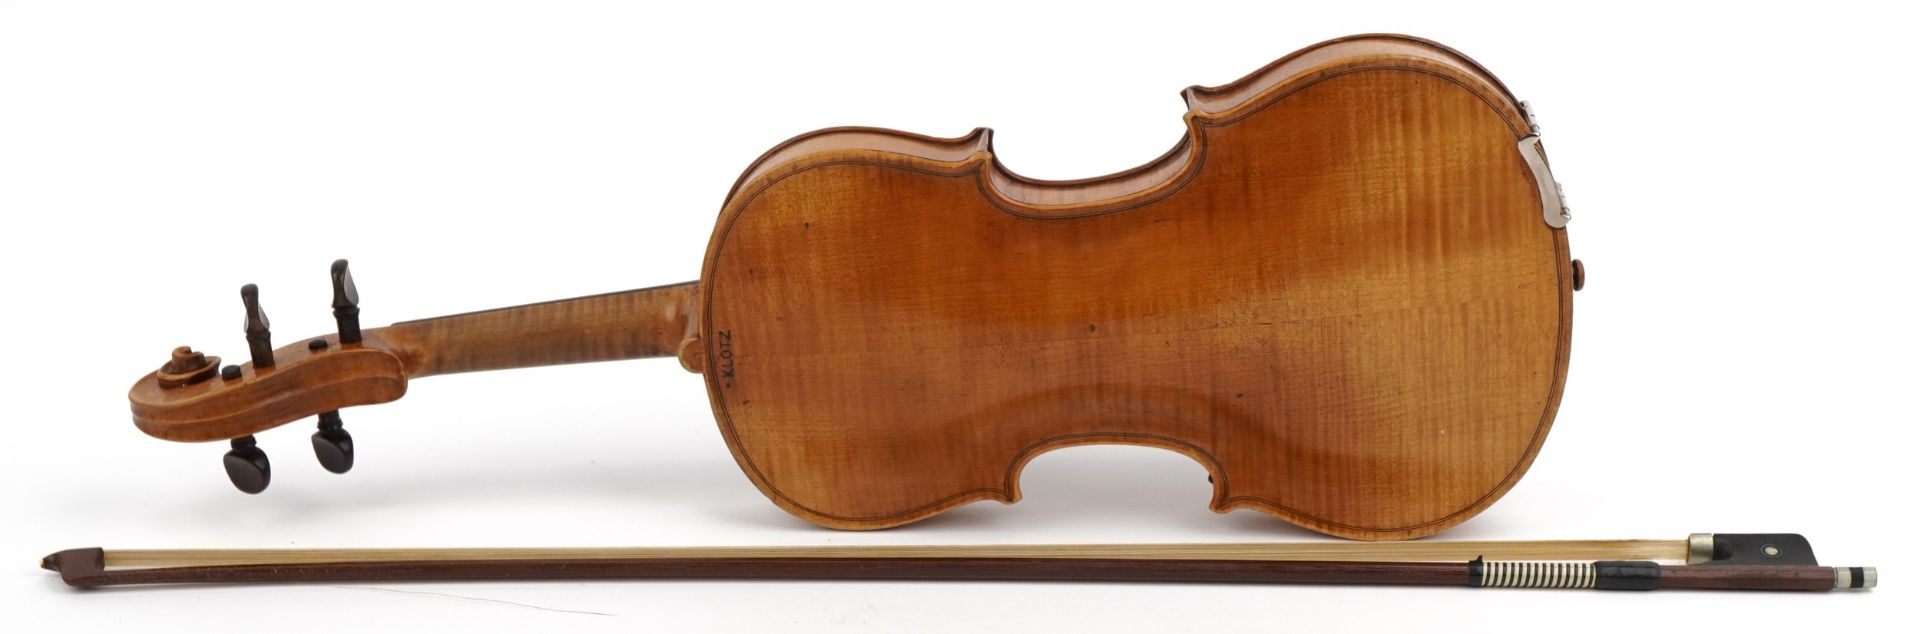 Old wooden violin with bow and protective case, the violin back impressed Klotz and 14 inches in - Image 6 of 12